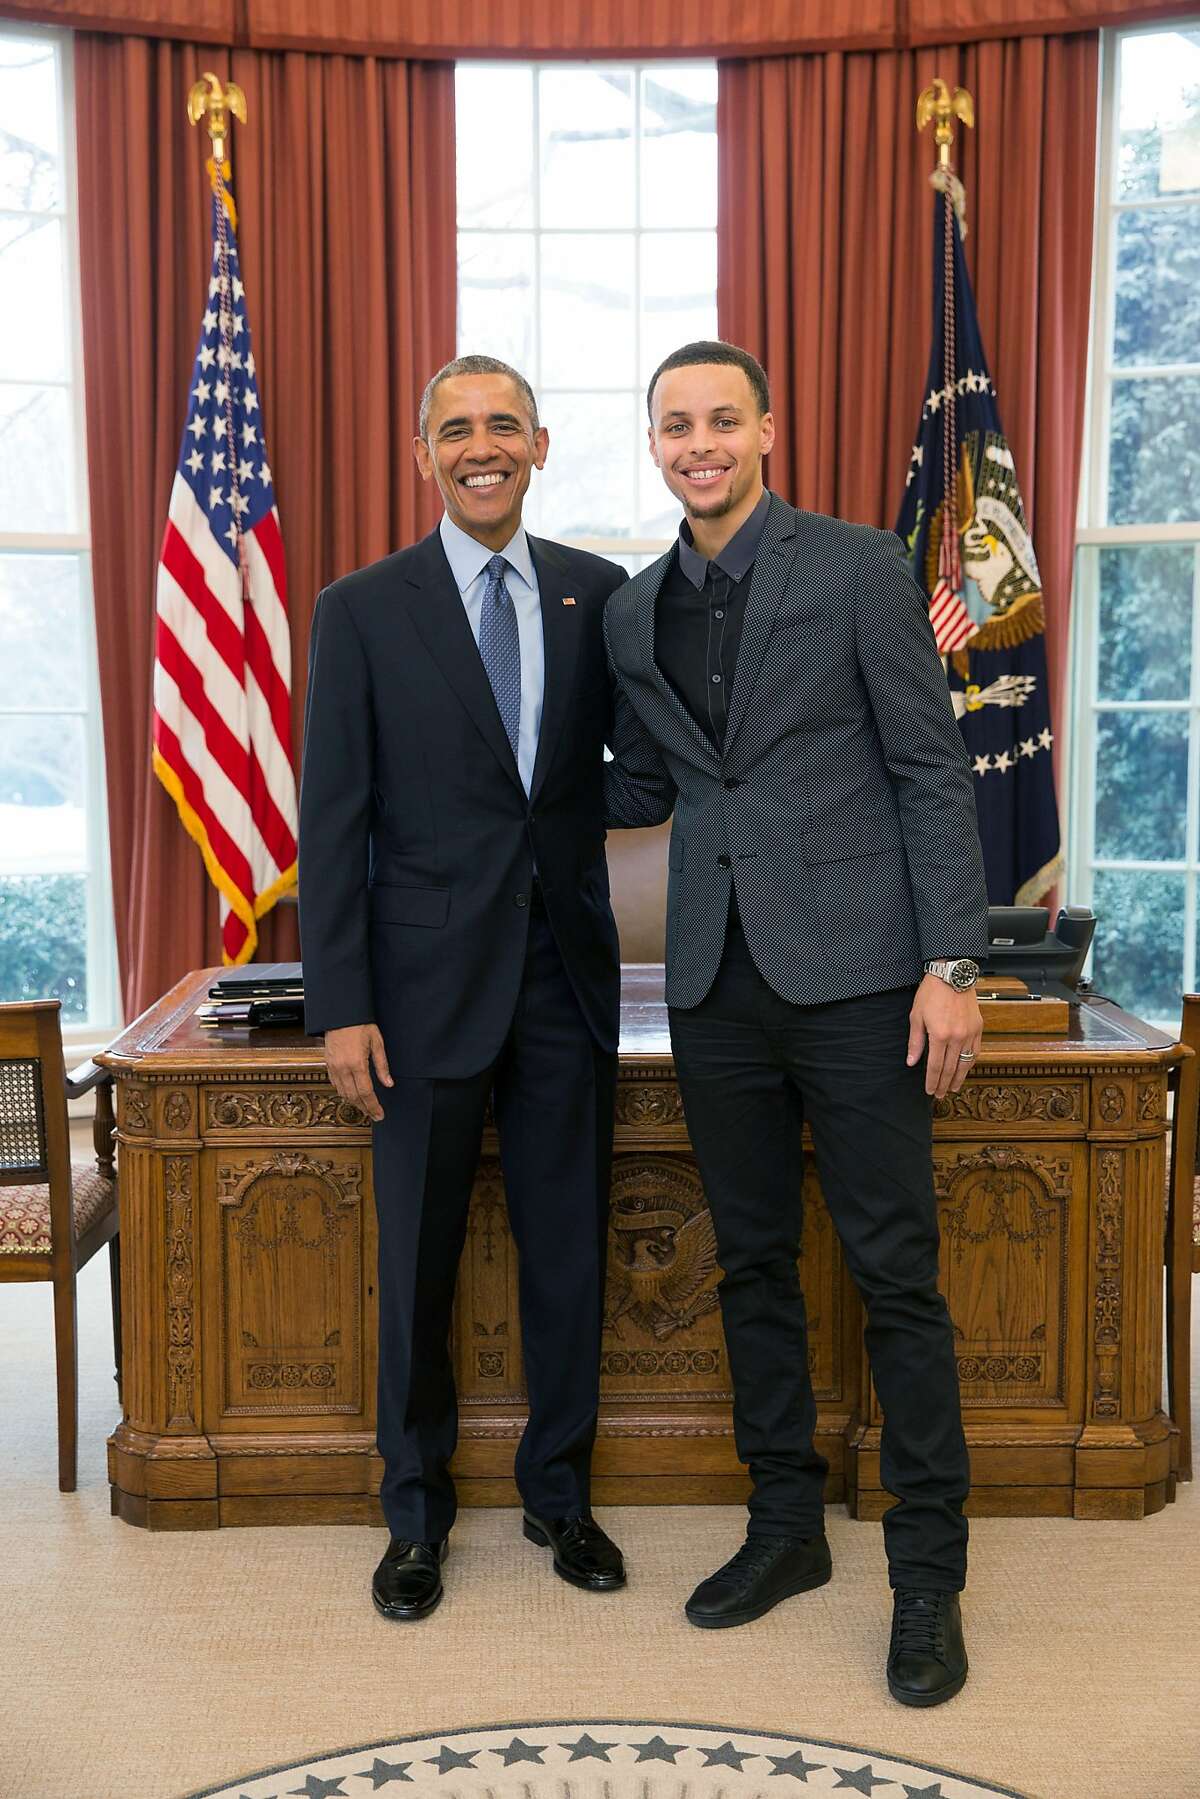 President Barack Obama poses with Warriors guard Stephen Curry in the Oval Office at the White House during Curry's visit on Wednesday.